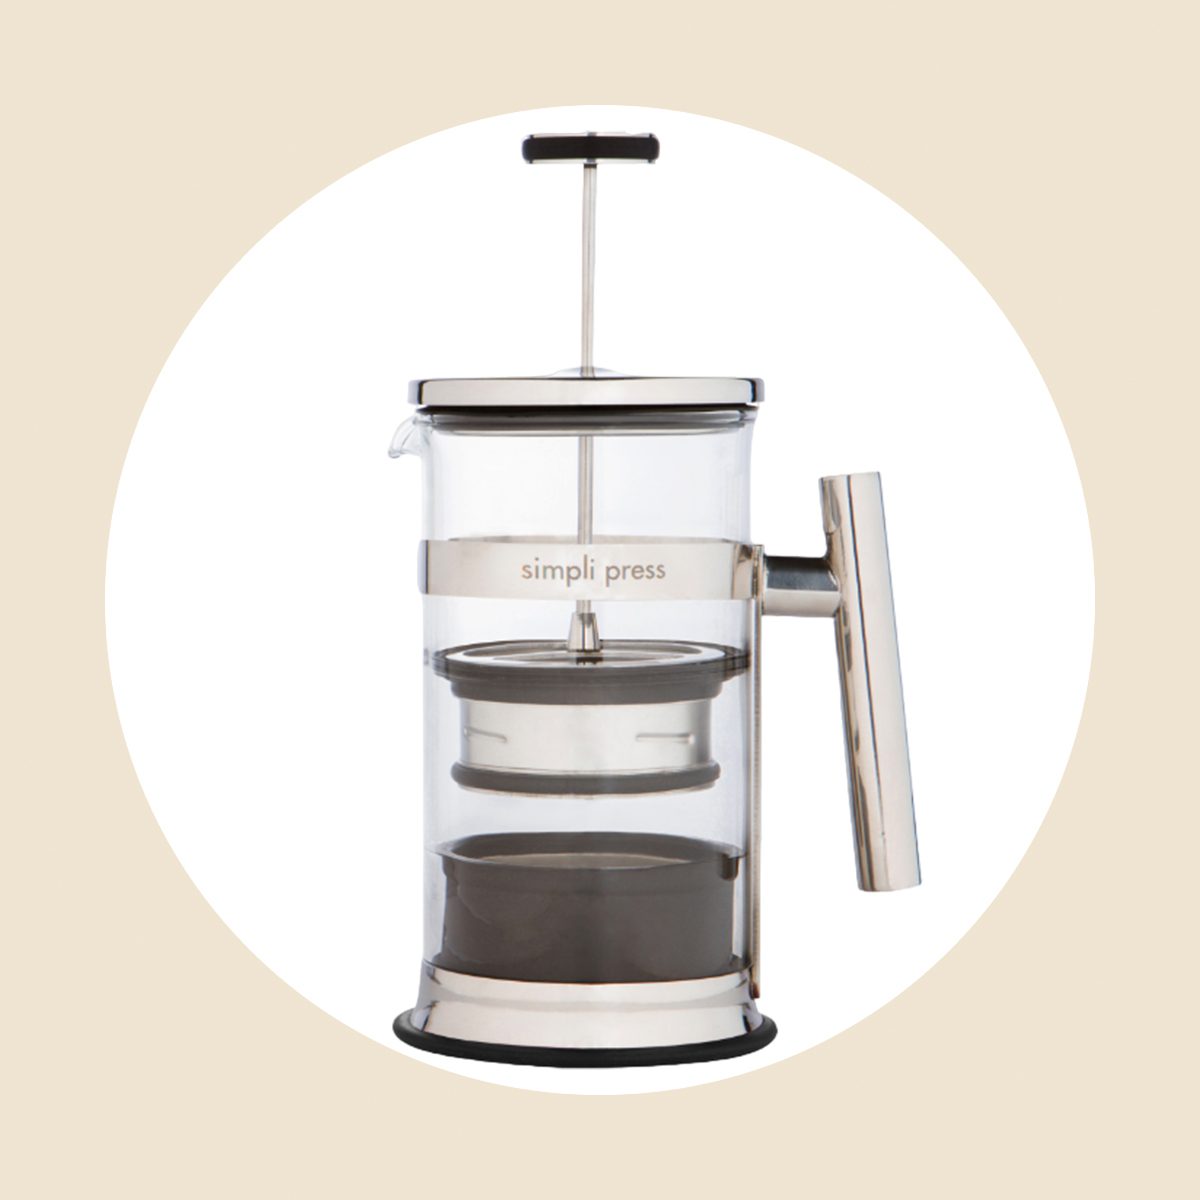 Home coffee bar accessories: 23 coffee gadgets, essentials, and